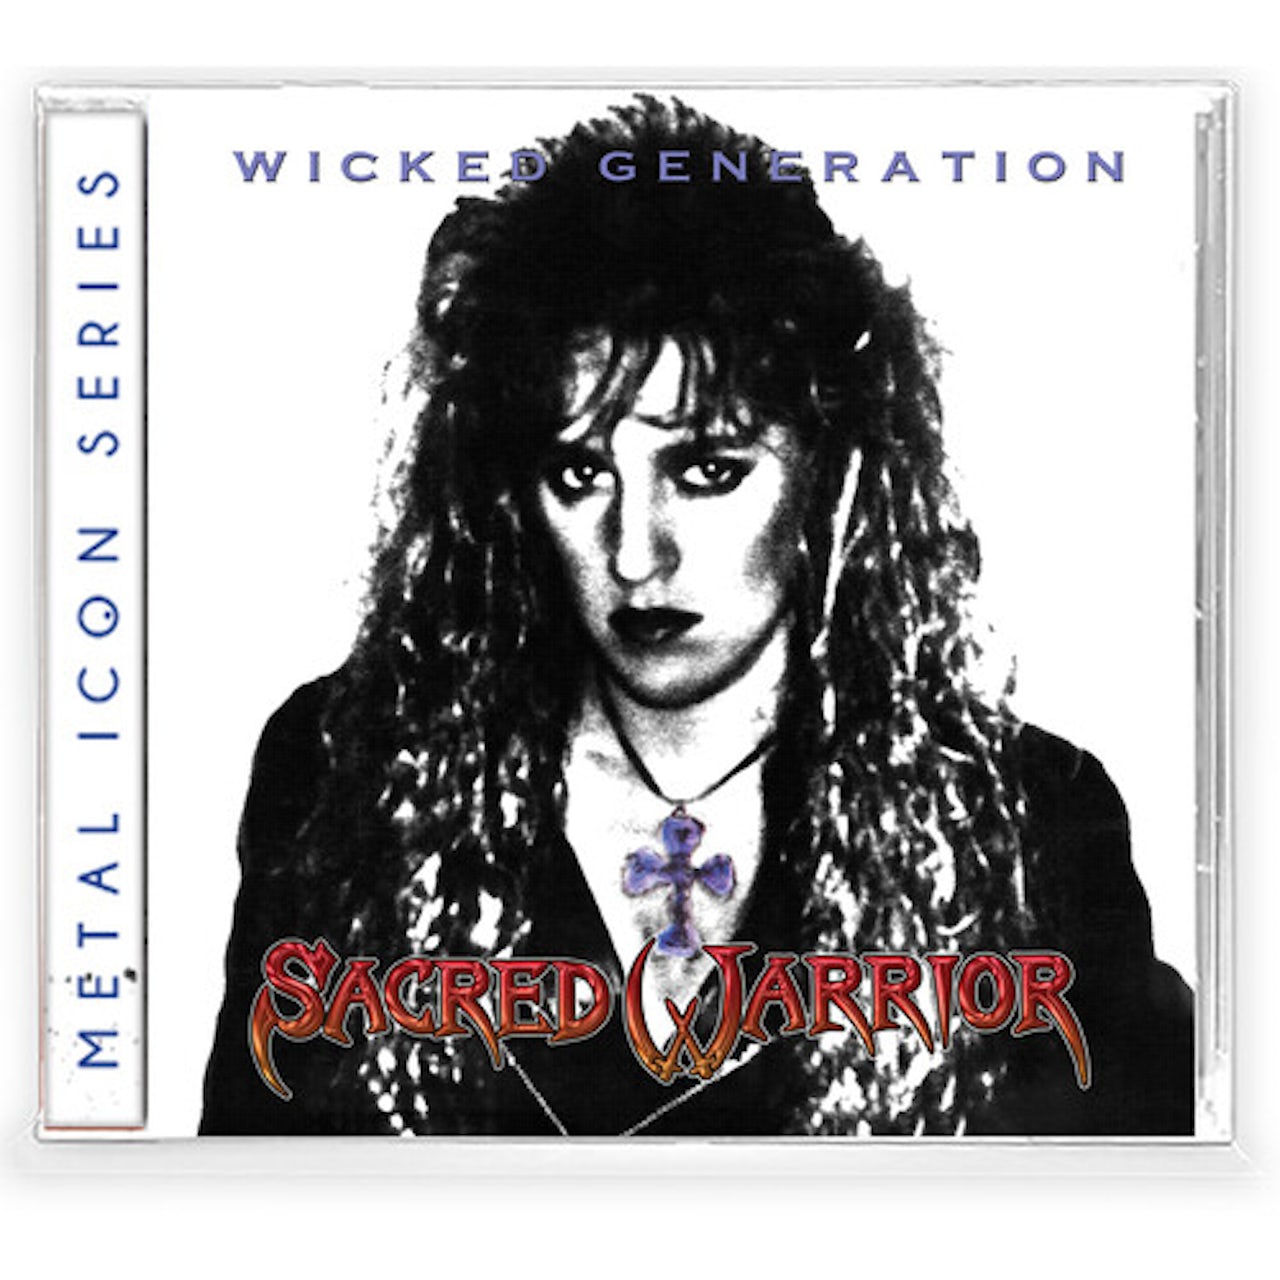 Wicked Generation cover art